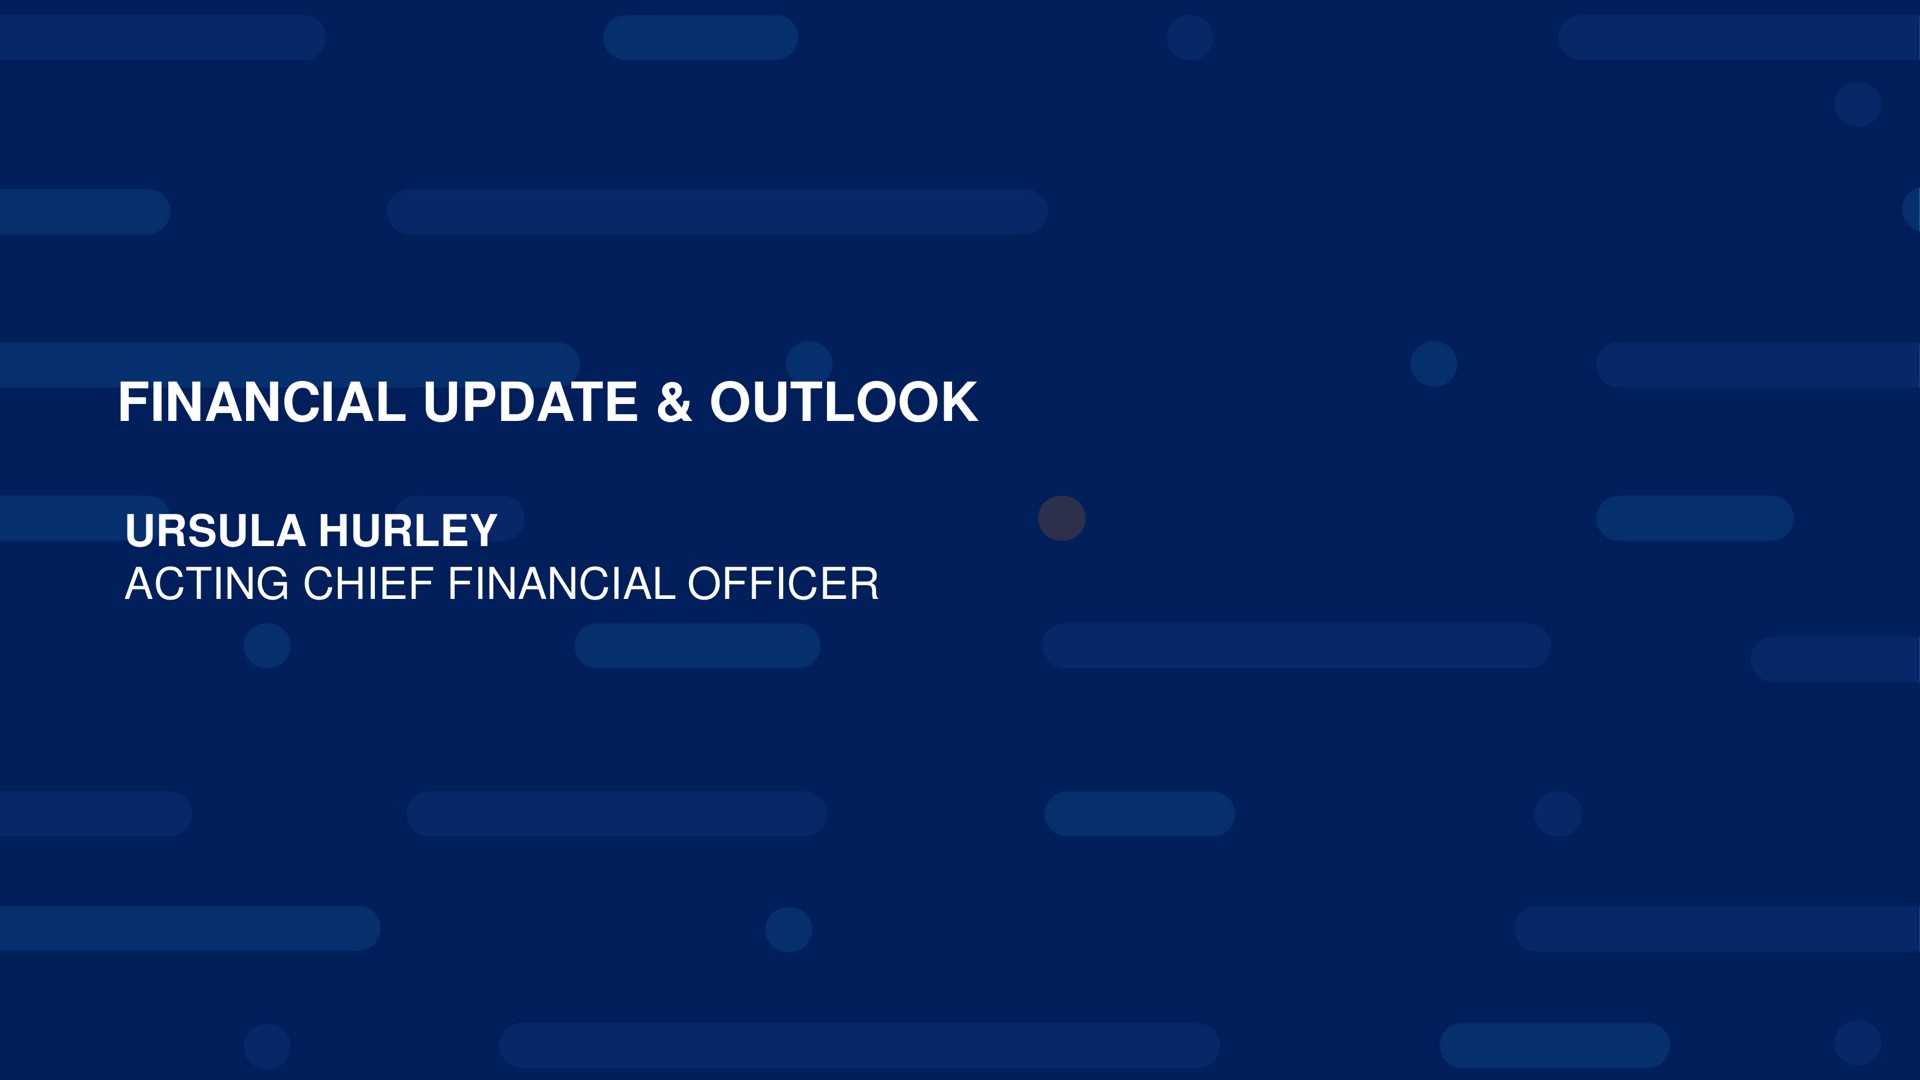 financial update outlook hurley acting chief financial officer | jetBlue